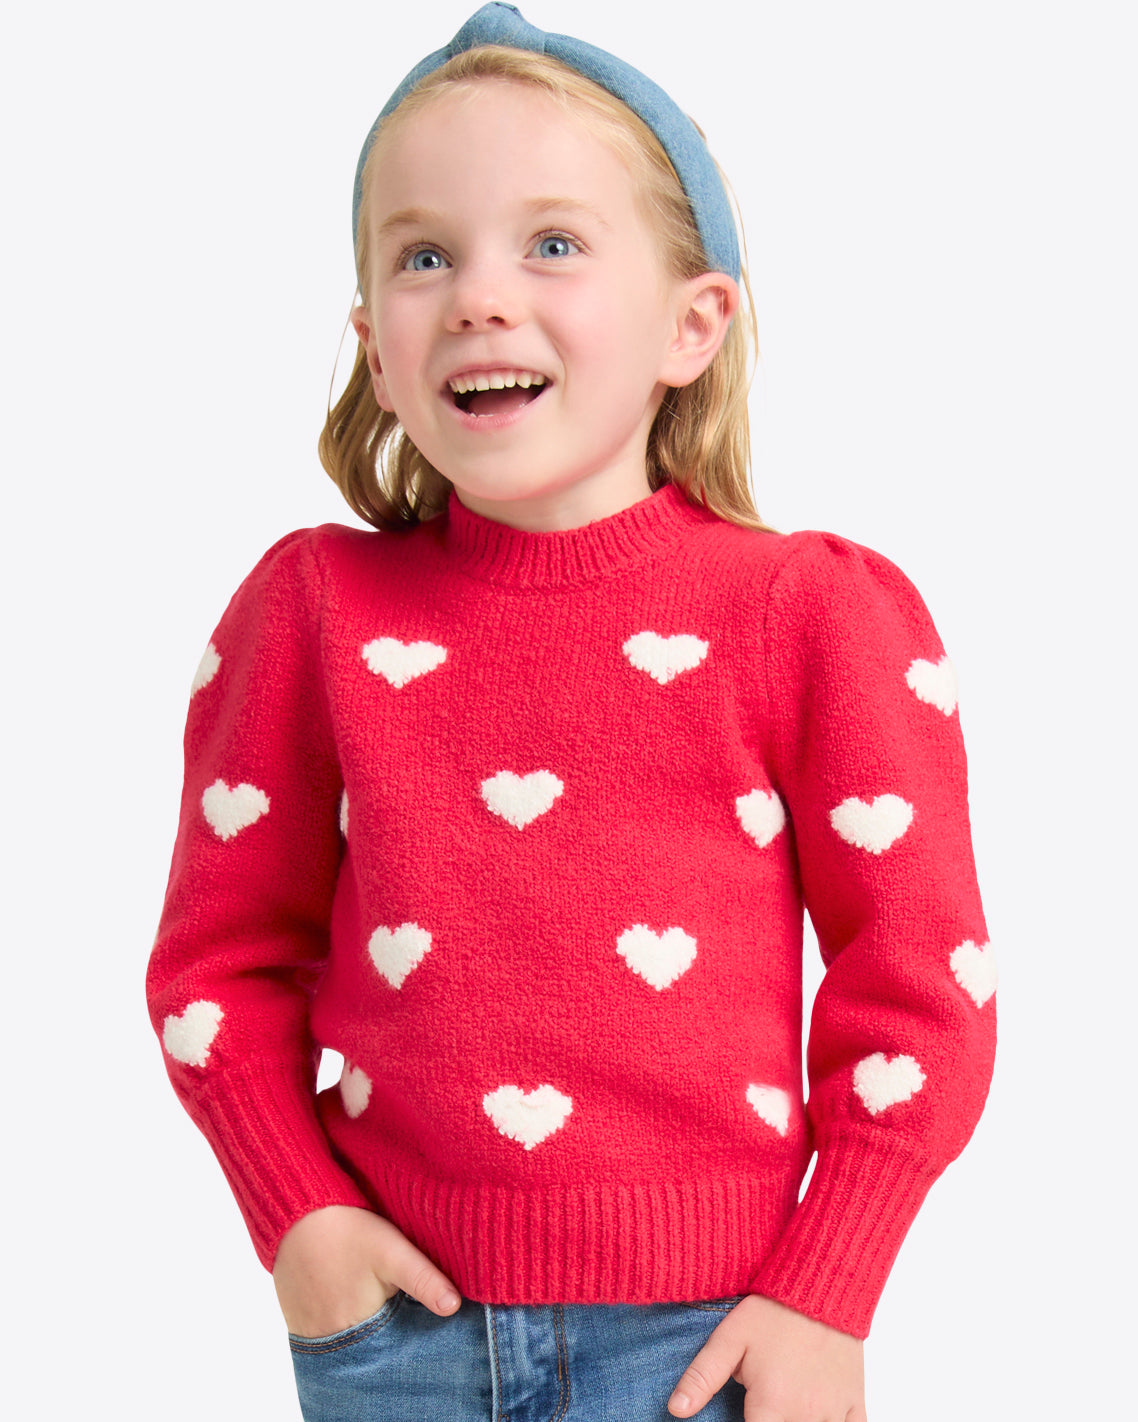 Kids Puff Sleeve Heart Sweater in Red